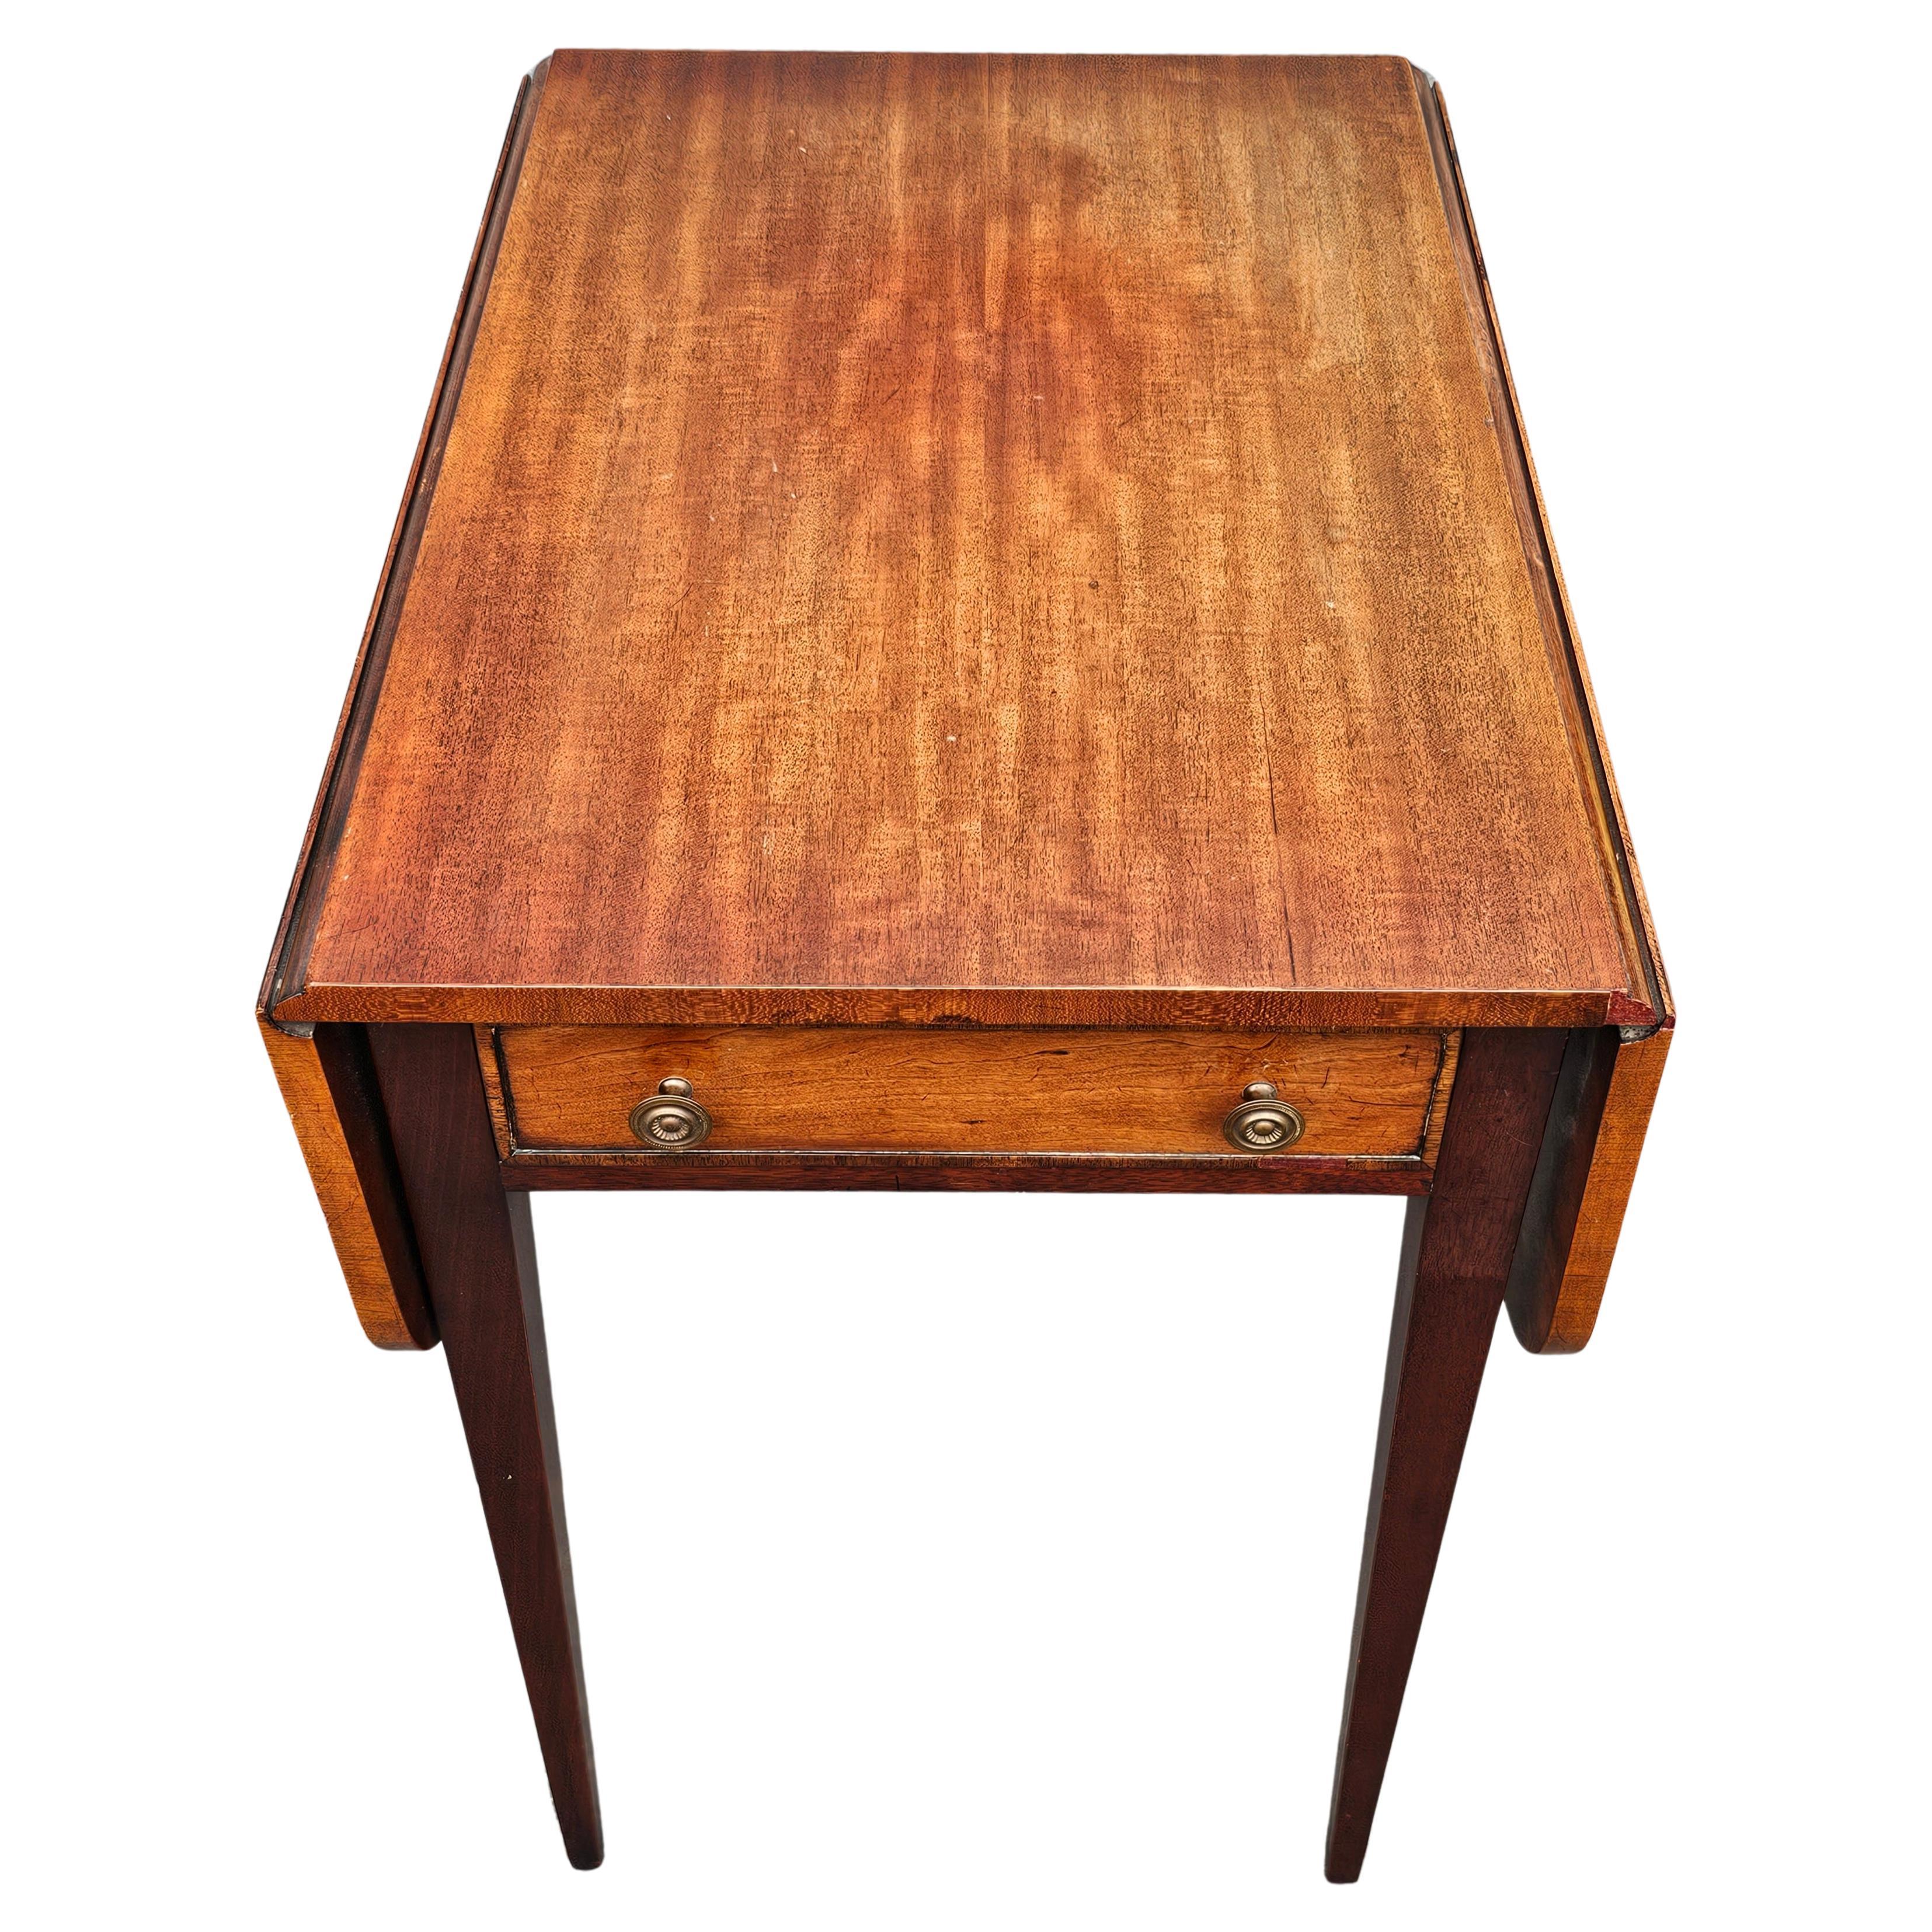 Other 19th Century Federal Style Mahogany Pembroke Table For Sale